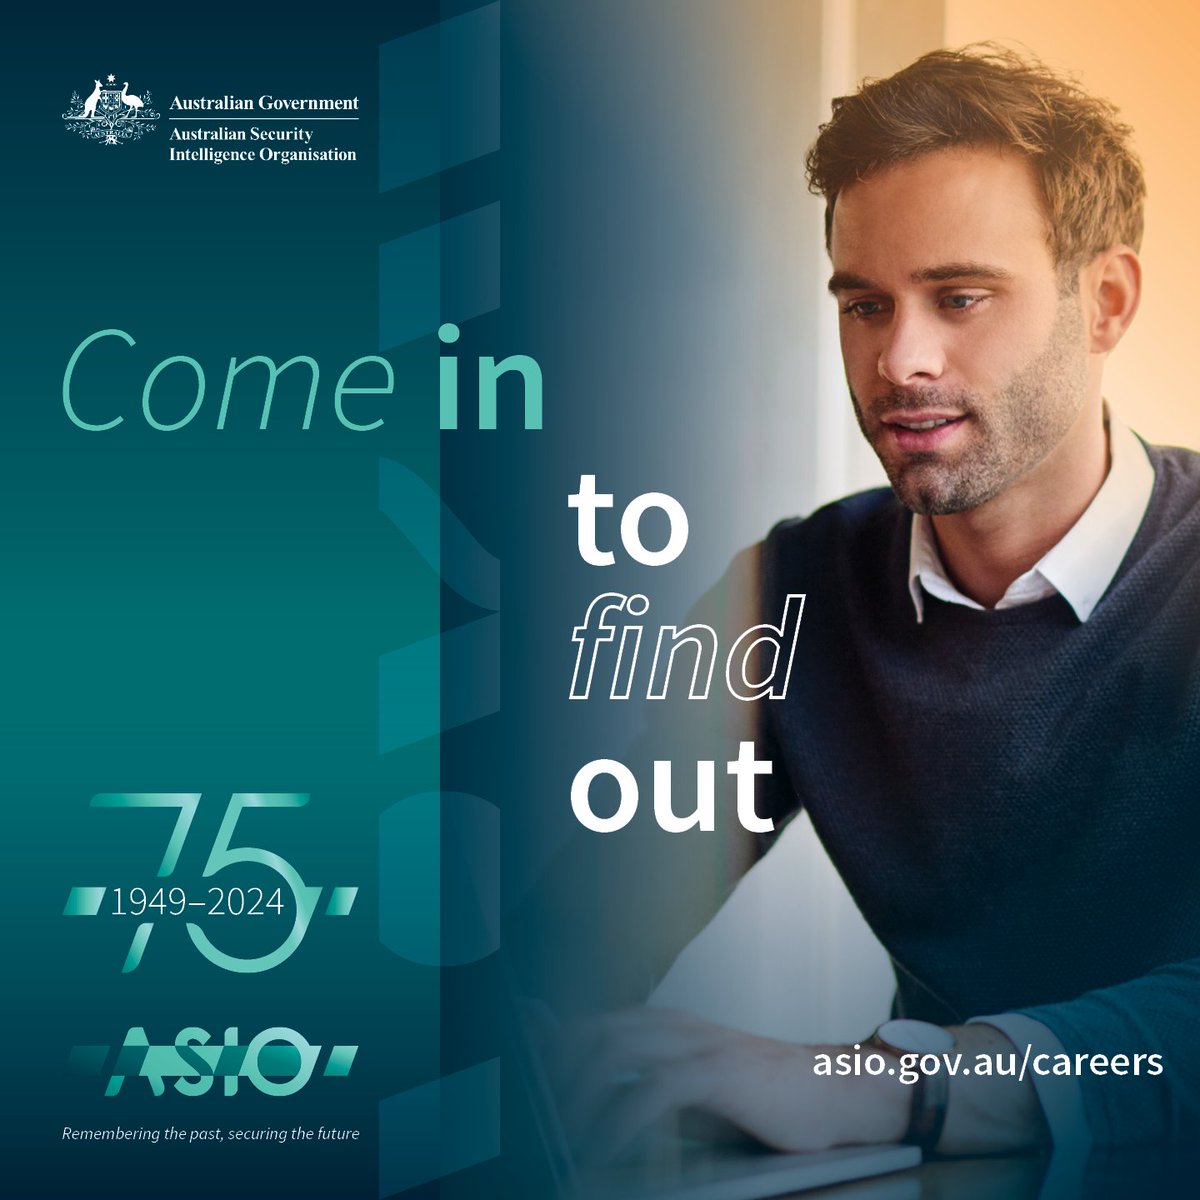 Are you studying #finance, #commerce or #accounting & looking for a career that makes a difference? #ASIO’s Finance Graduate Program will set you up for a career in finance across the breadth of ASIO’s work. Learn more & apply at asio.gov.au/careers.